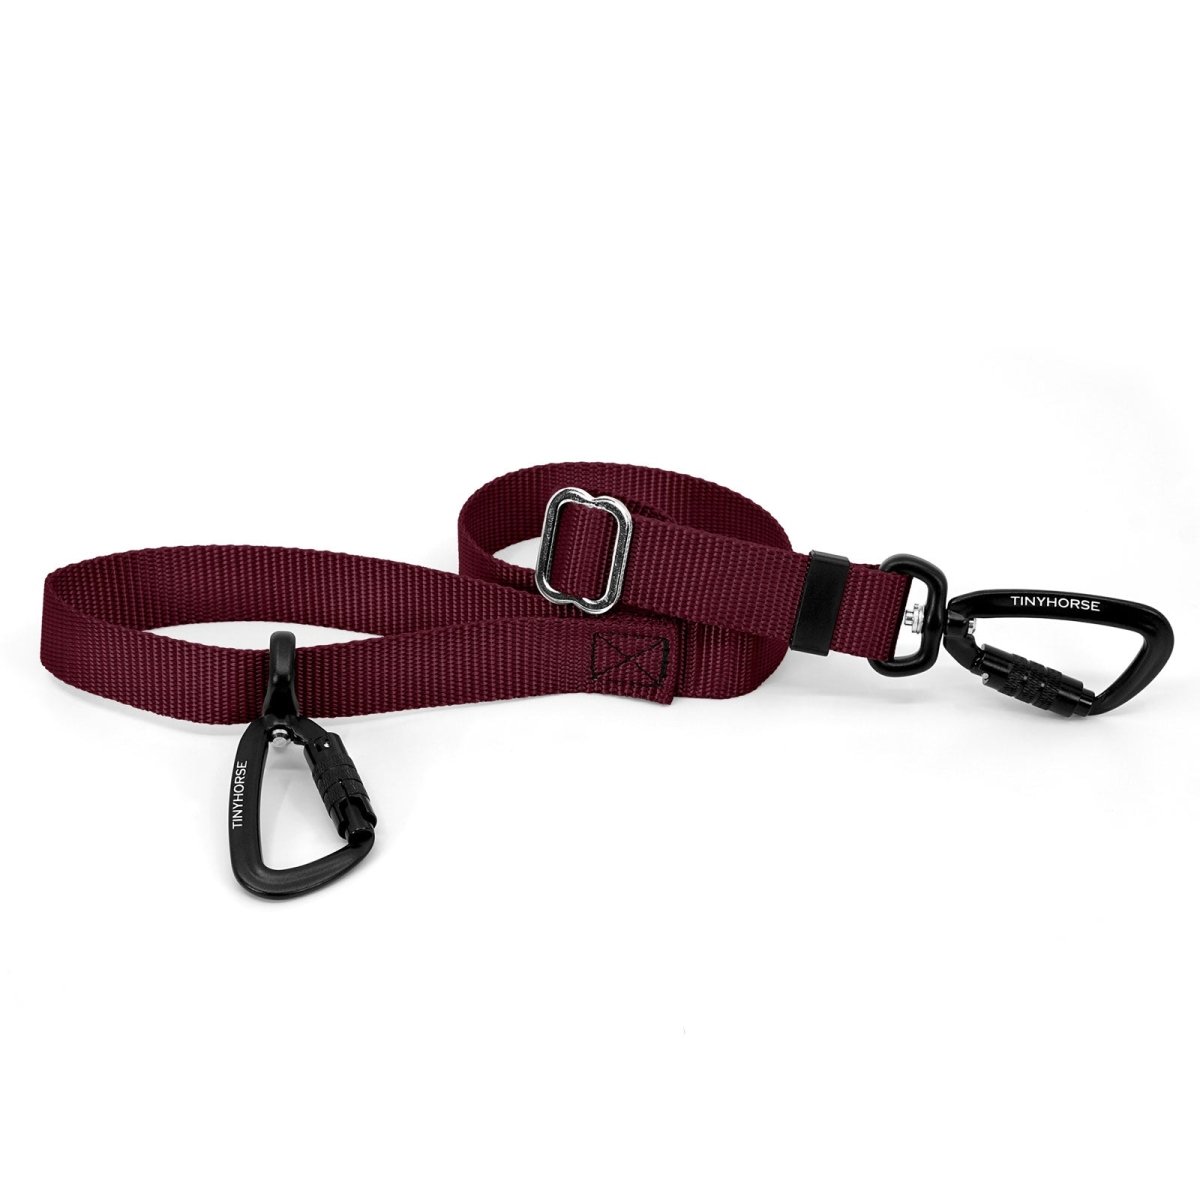 A burgundy-coloured Lead-All Lite with an adjustable nylon webbing leash and 2 auto-locking carabiners